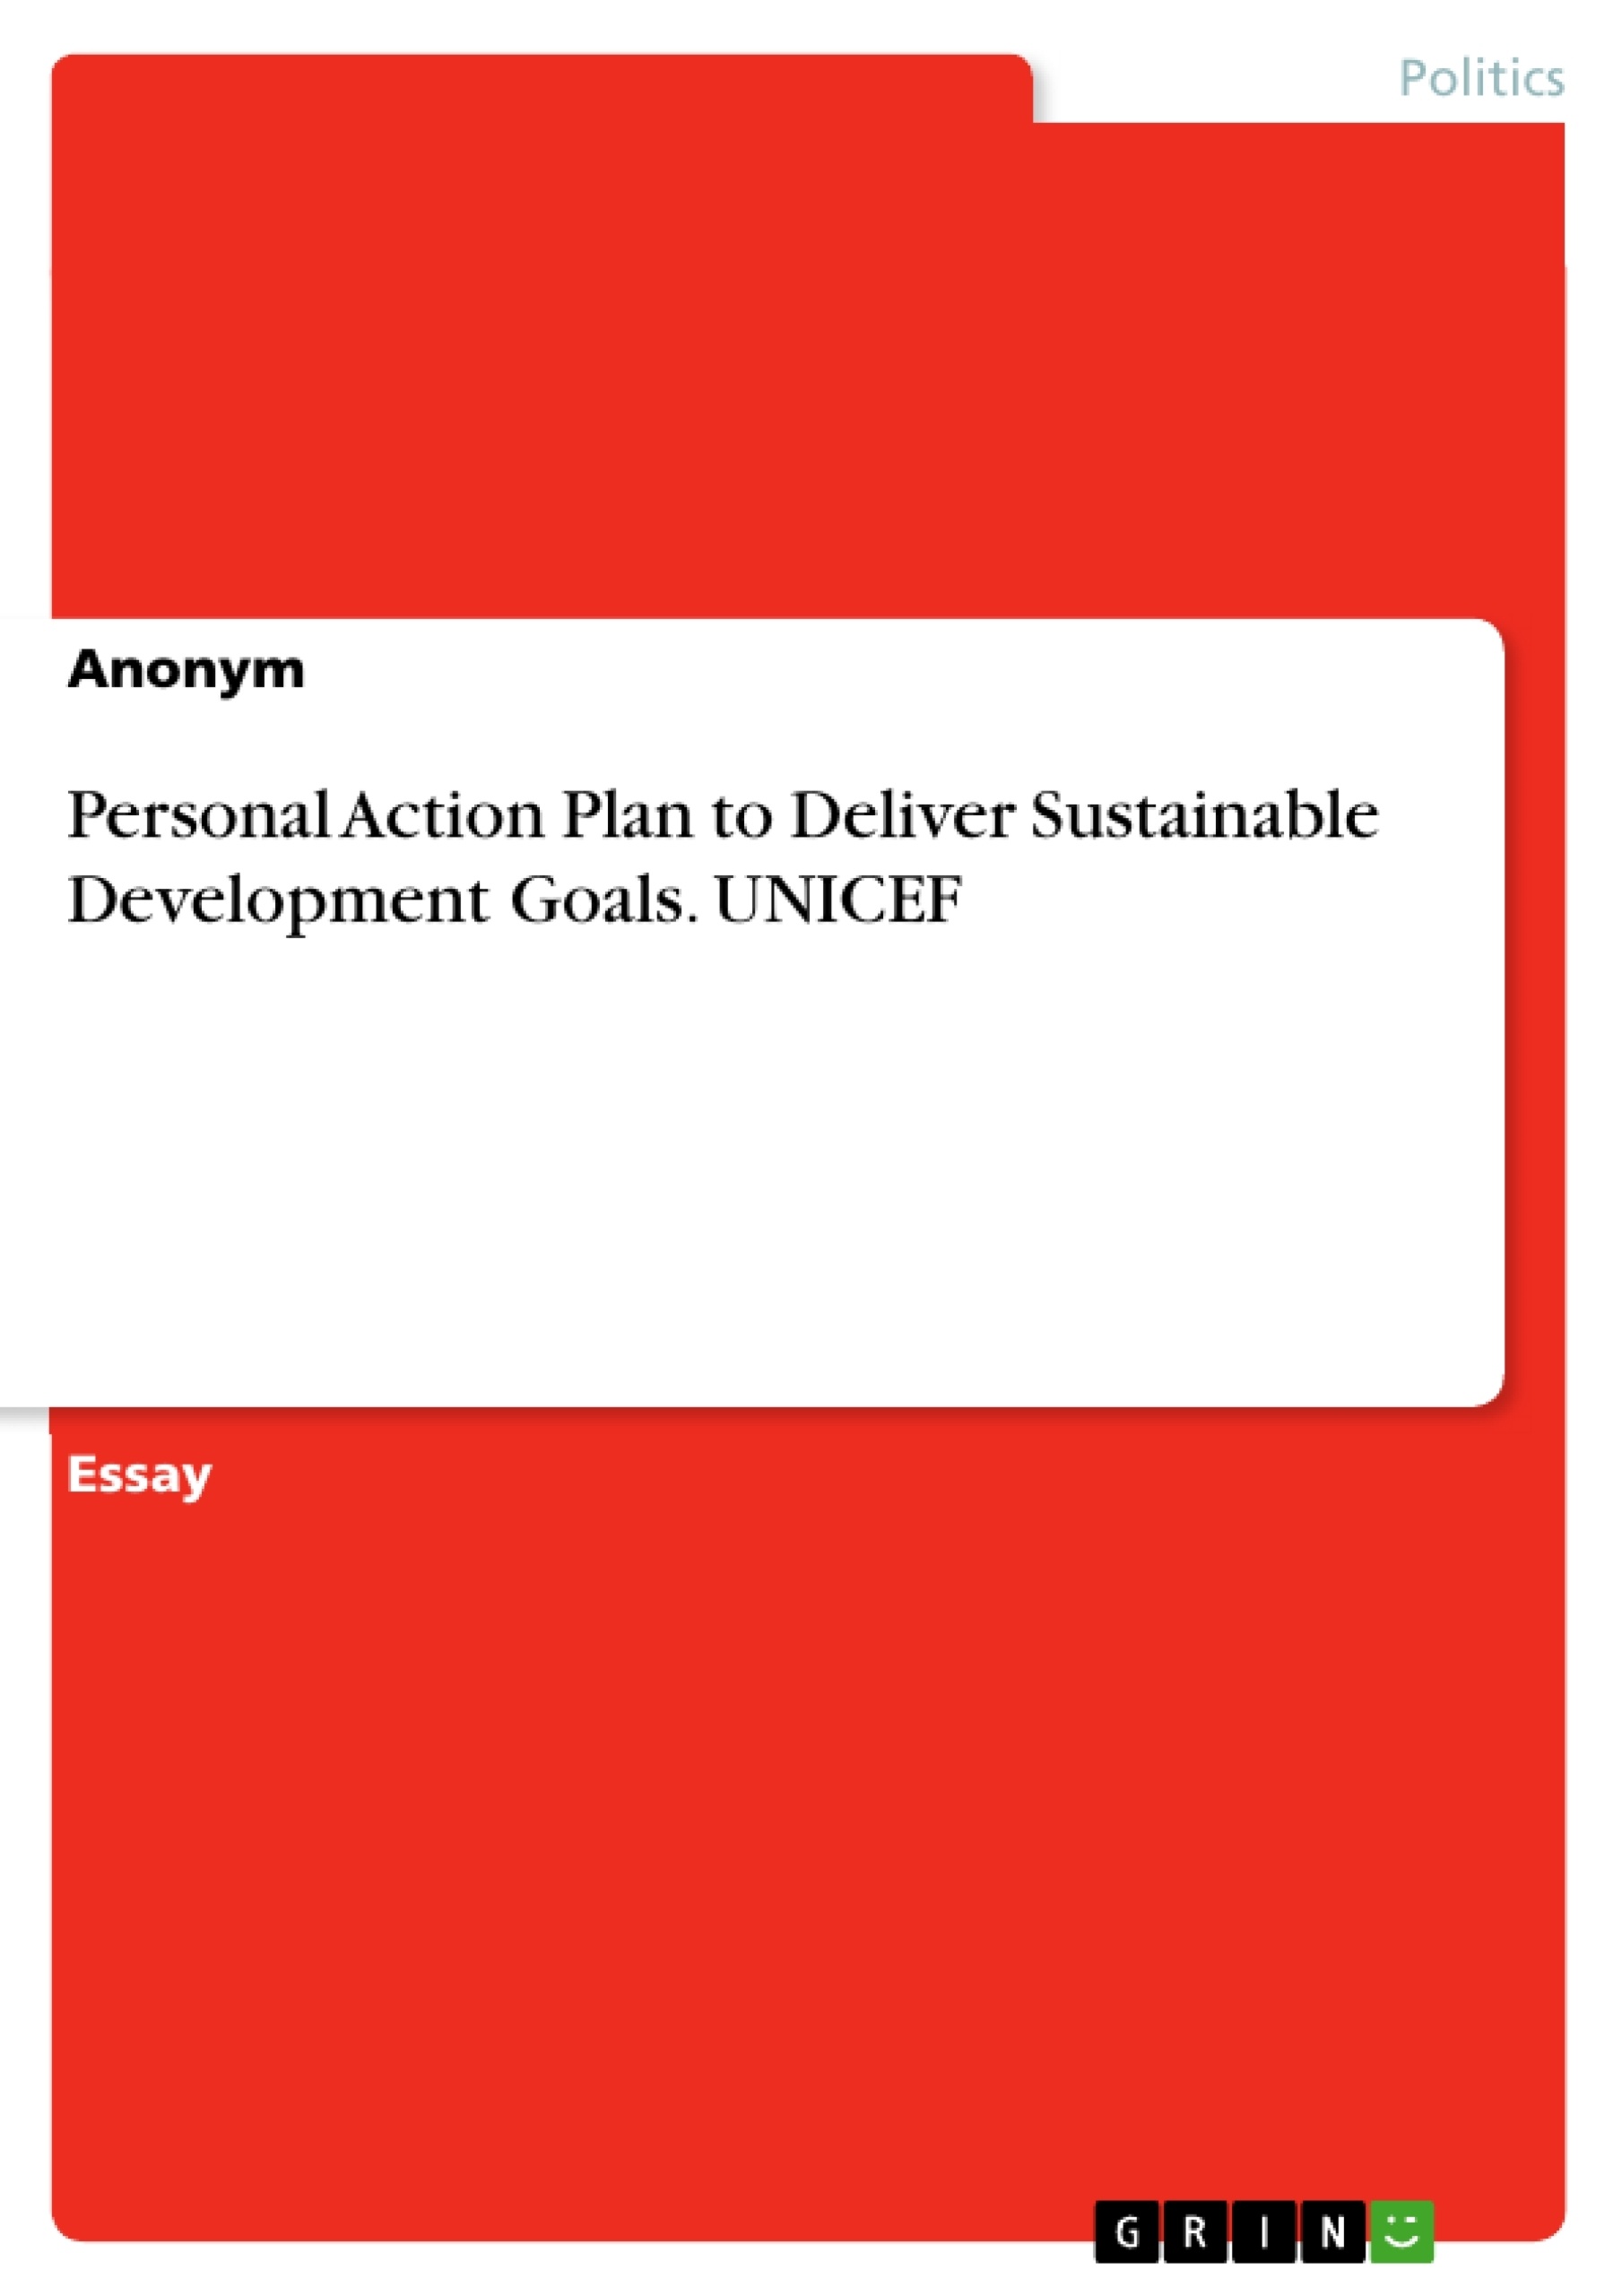 Title: Personal Action Plan to Deliver Sustainable Development Goals. UNICEF